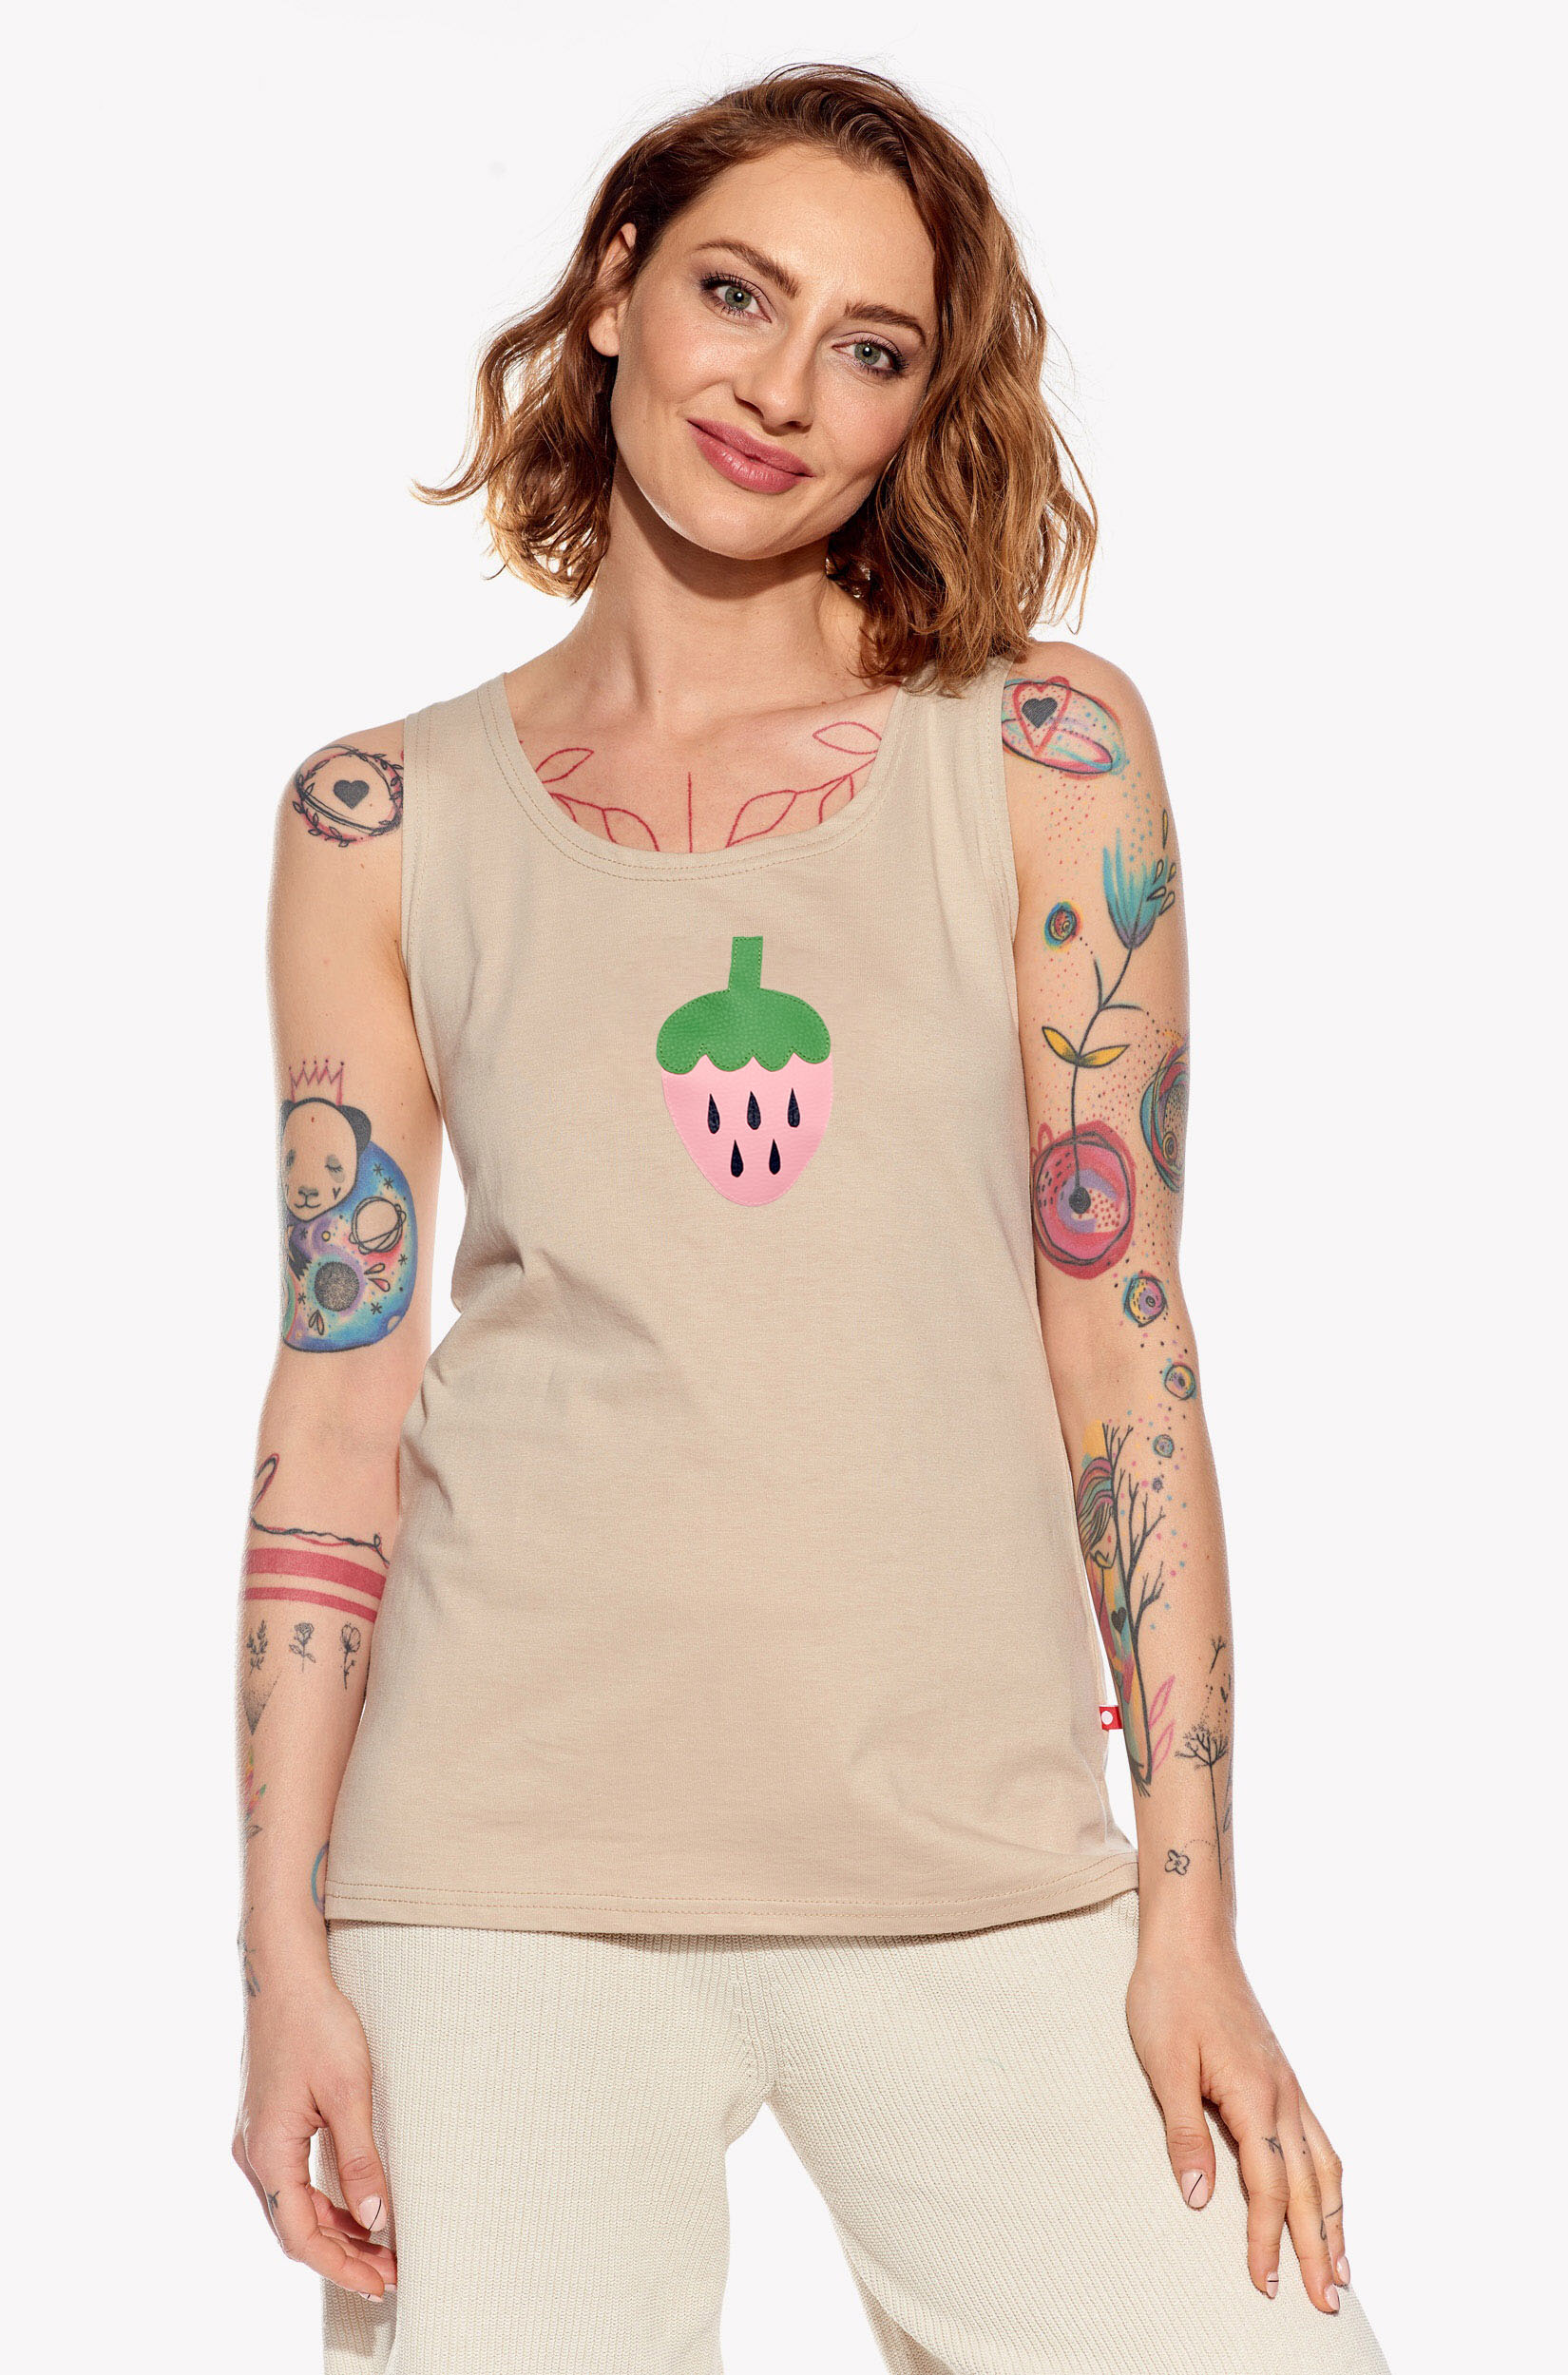 Singlet with strawberry